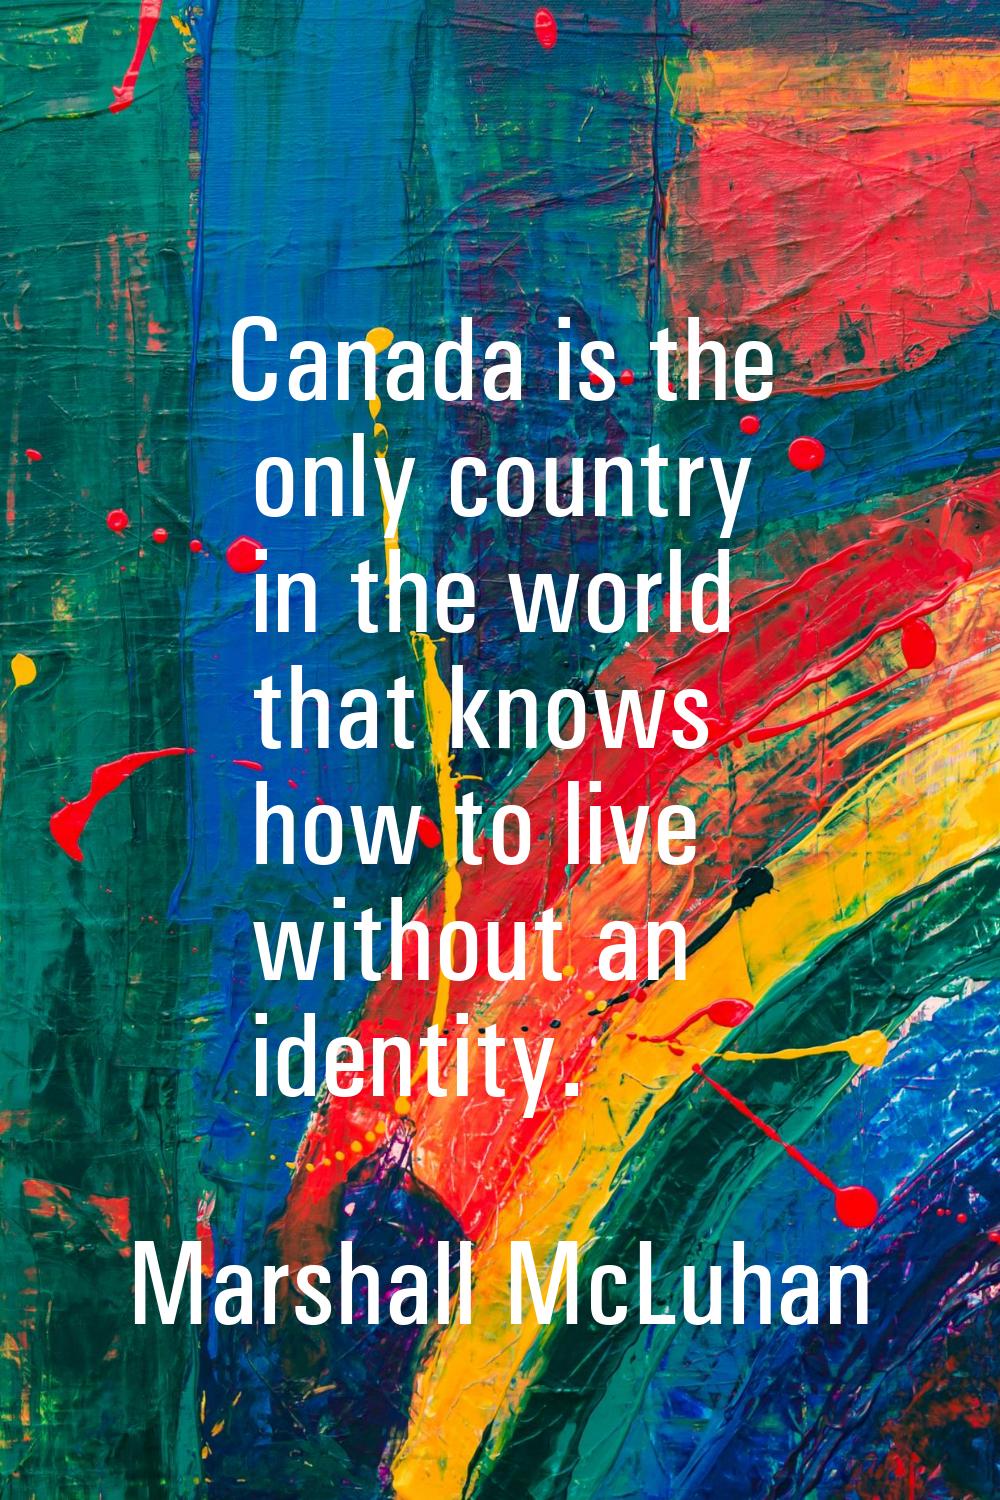 Canada is the only country in the world that knows how to live without an identity.